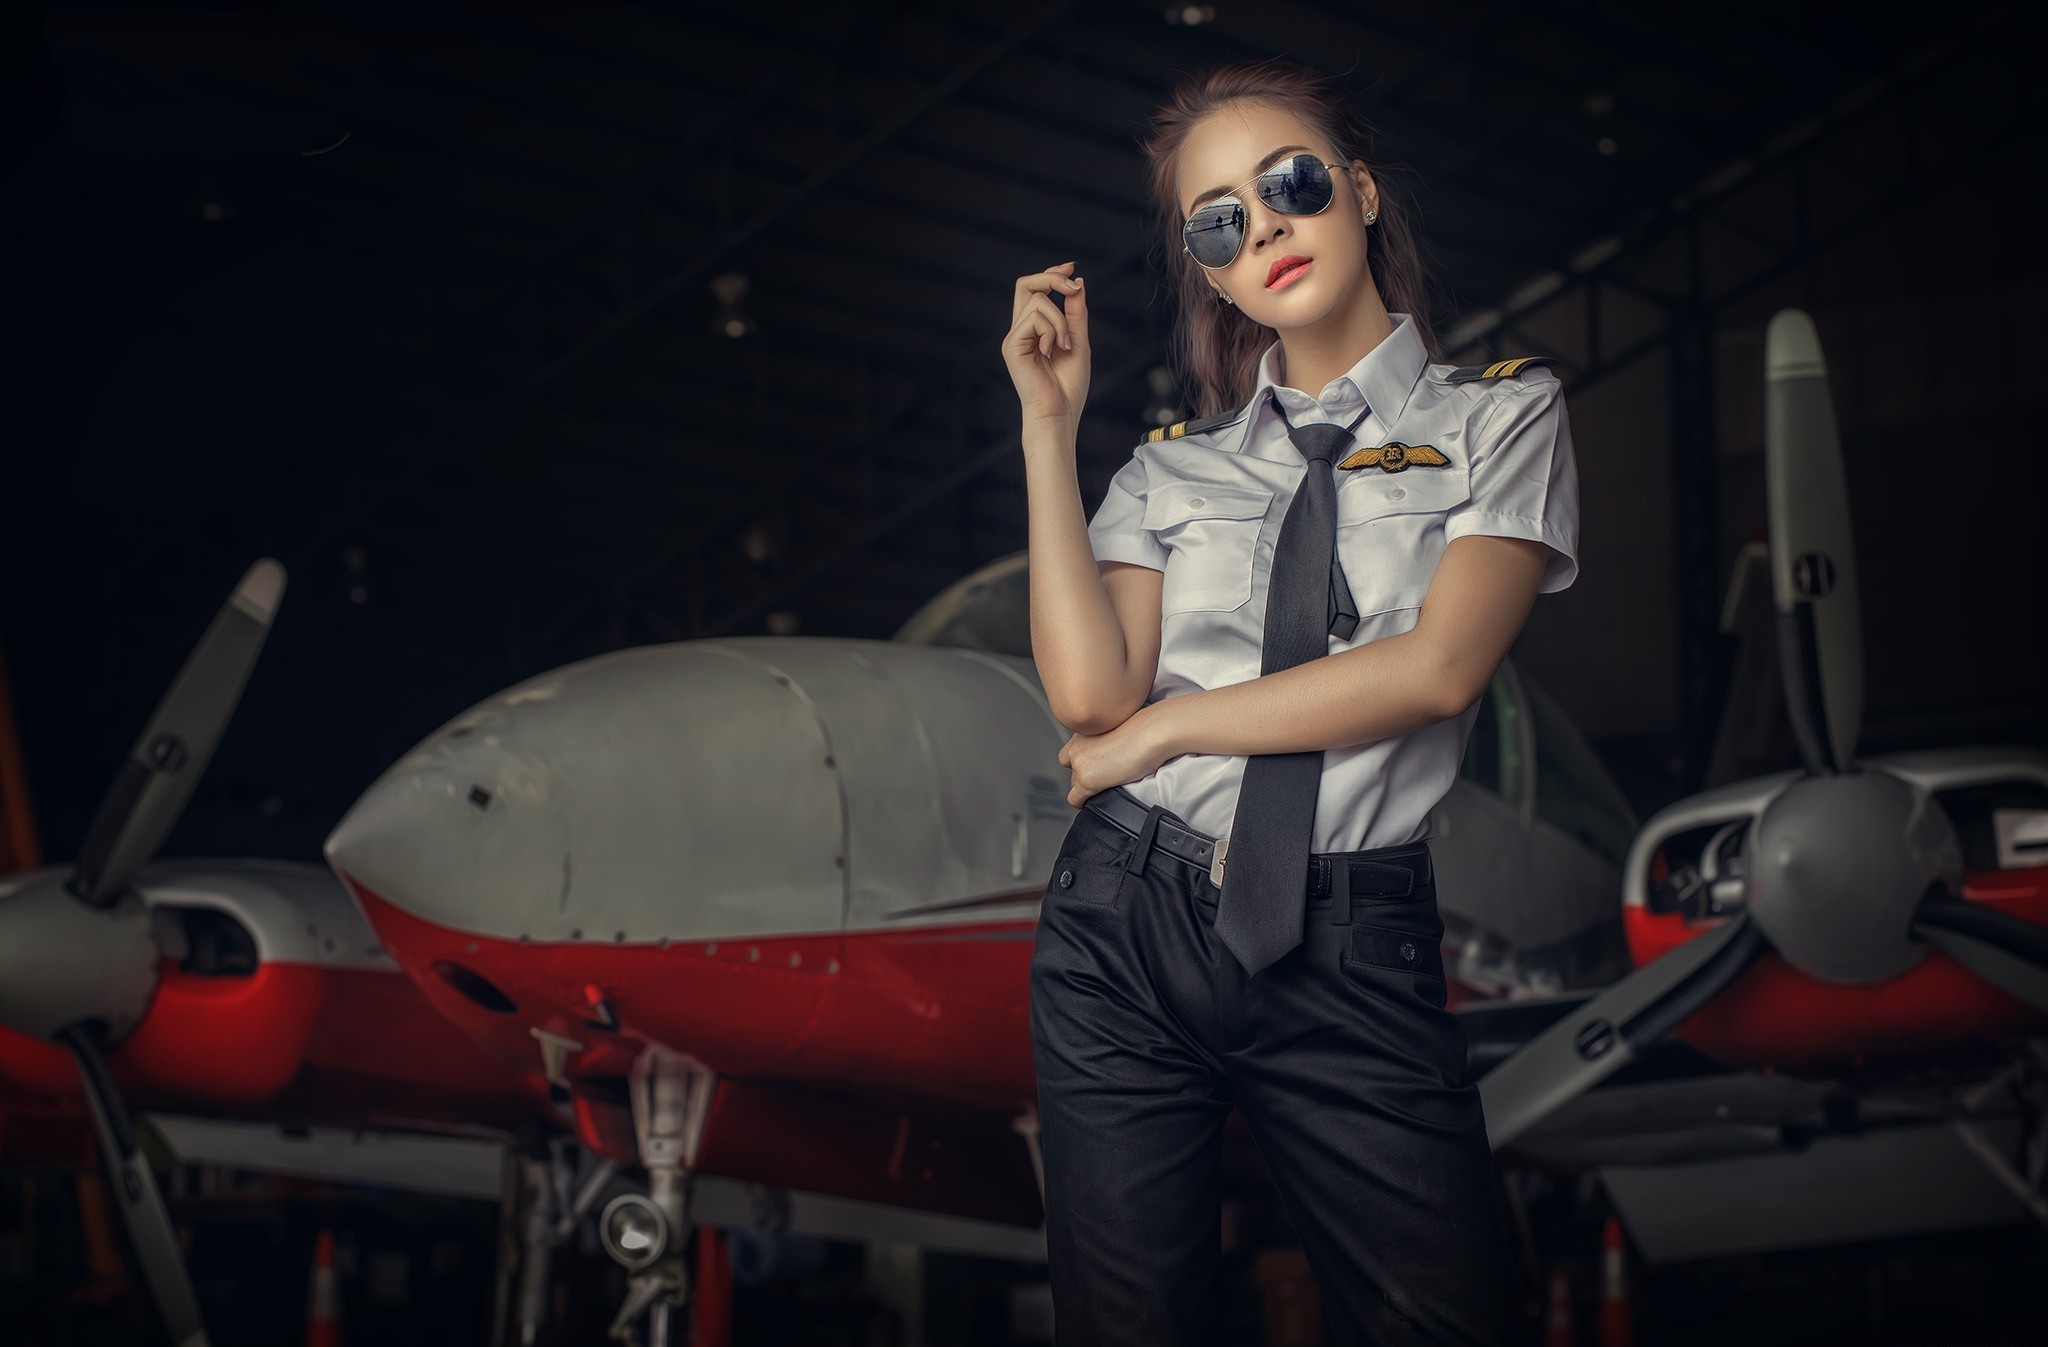 People 2048x1347 Asian women face pilot women with shades women with planes tie